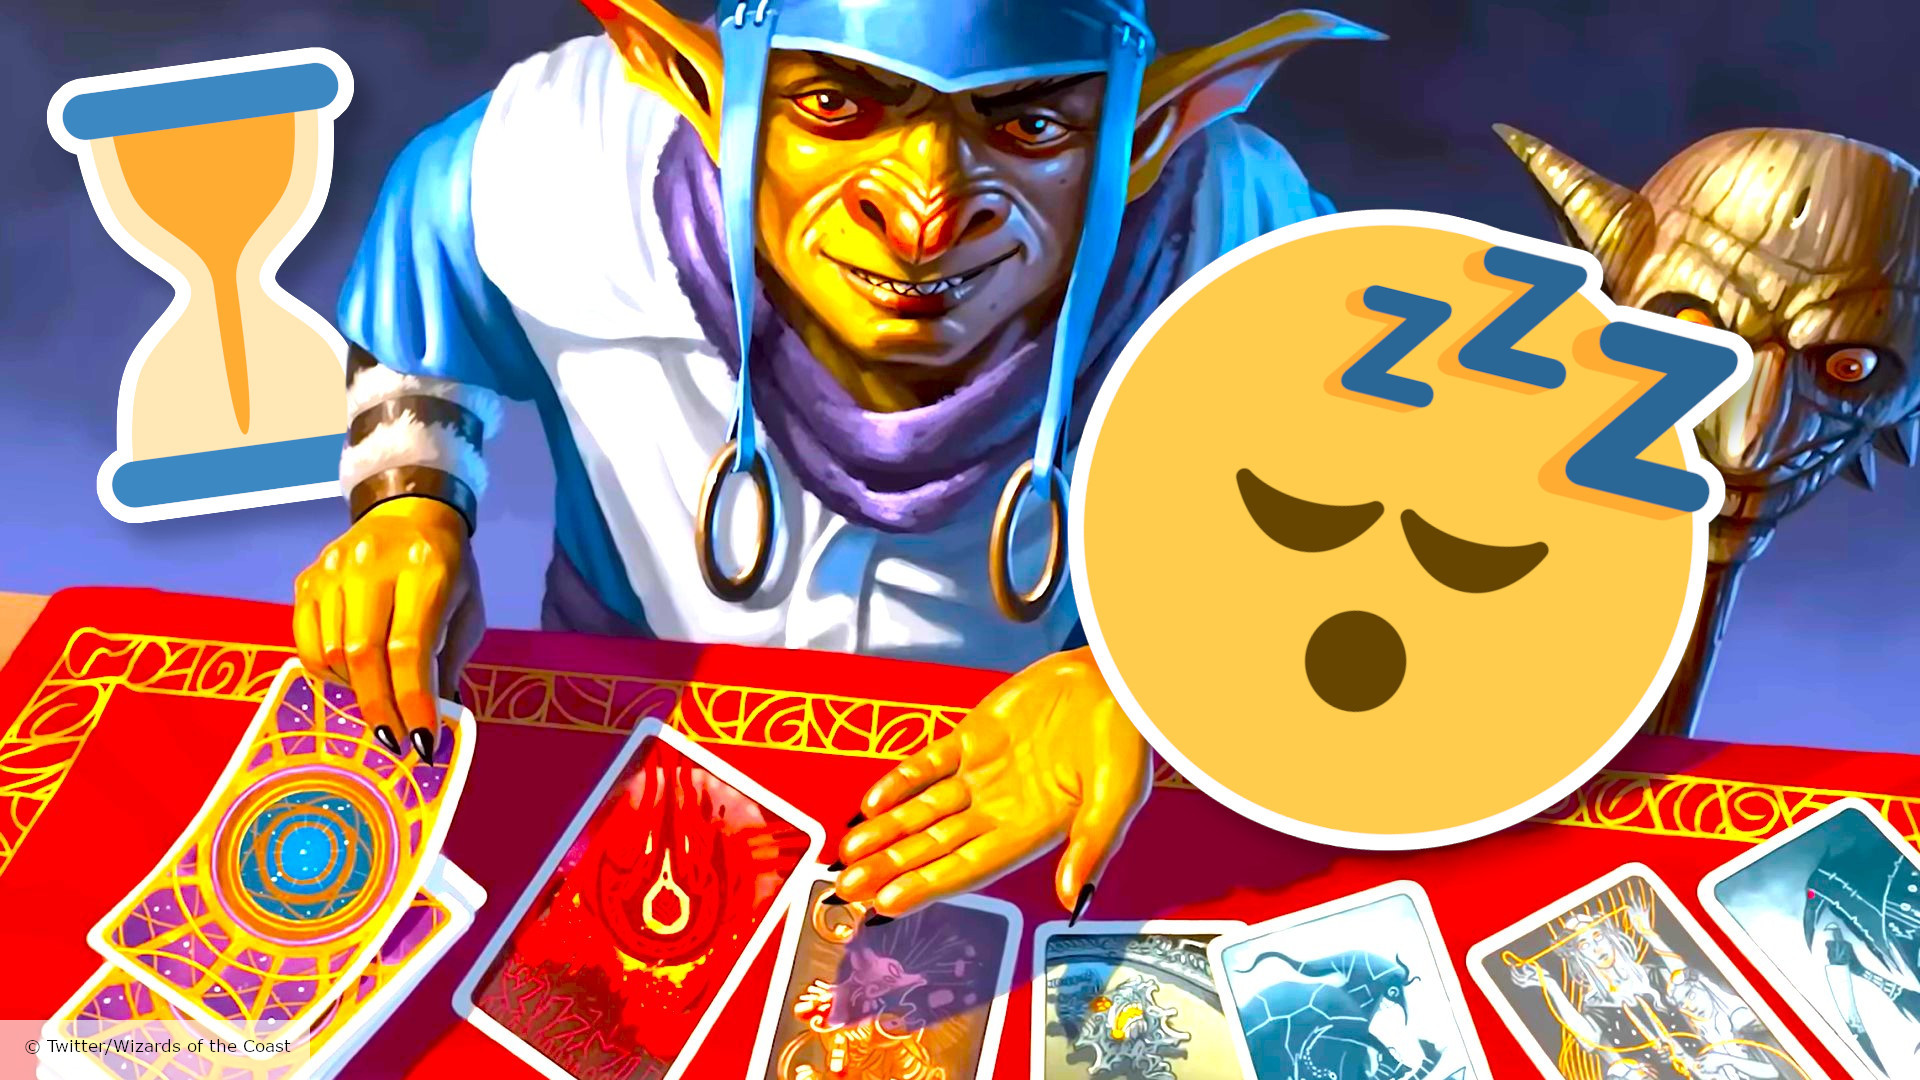 D&D delays Deck of Many Things release due to extensive